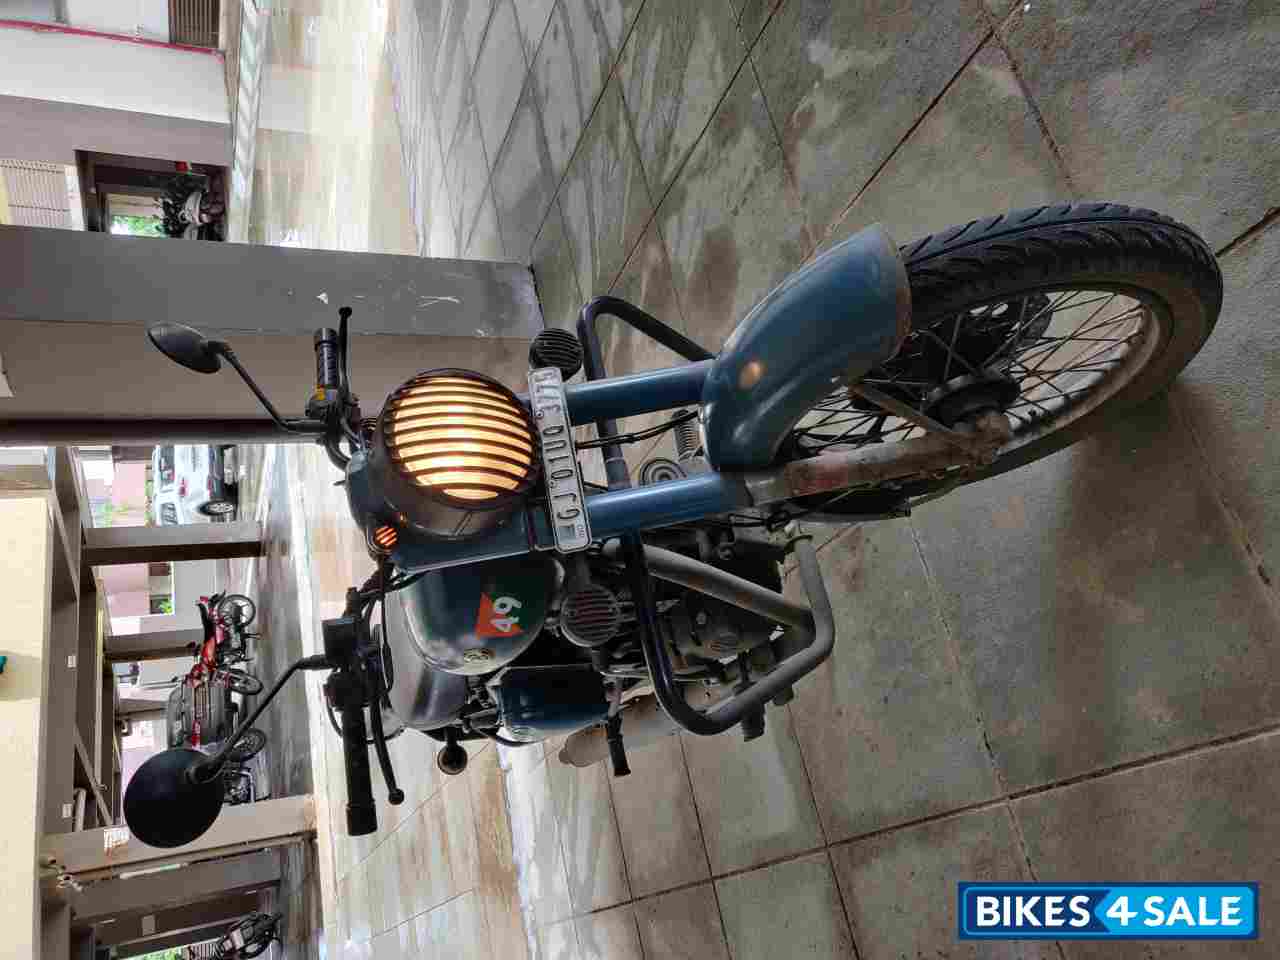 Airborne Blue Royal Enfield Classic Signals Airborne Blue